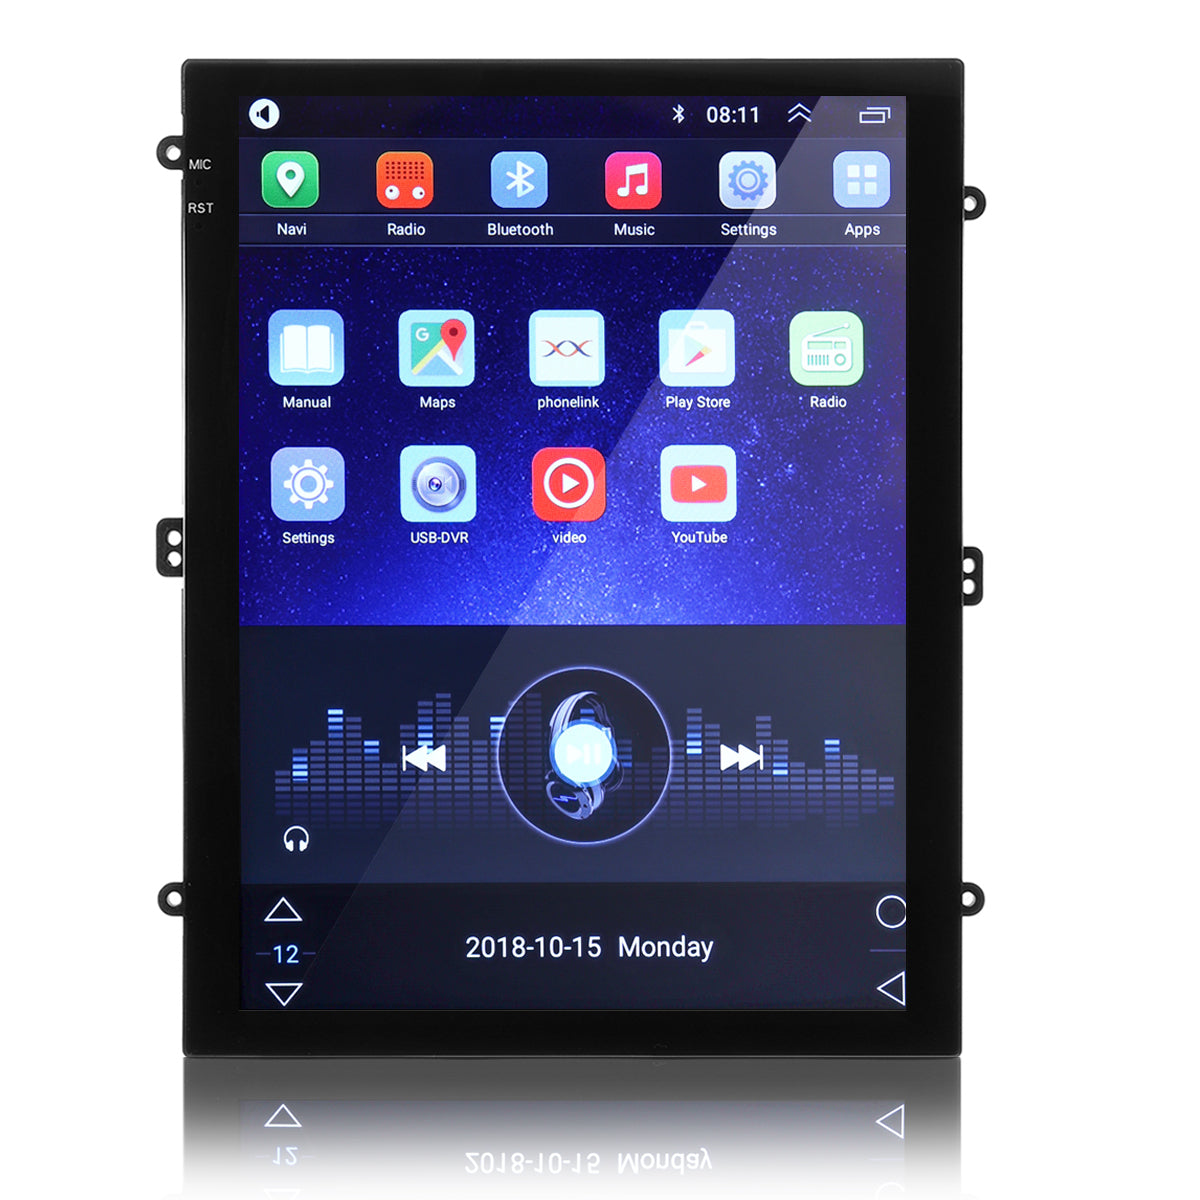 YUEHOO 9.7 Inch 2DIN for Android 8.1 Car Stereo Multimedia Player Quad Core 1+16G 2.5D Portrait Screen GPS WIFI FM Radio - Auto GoShop